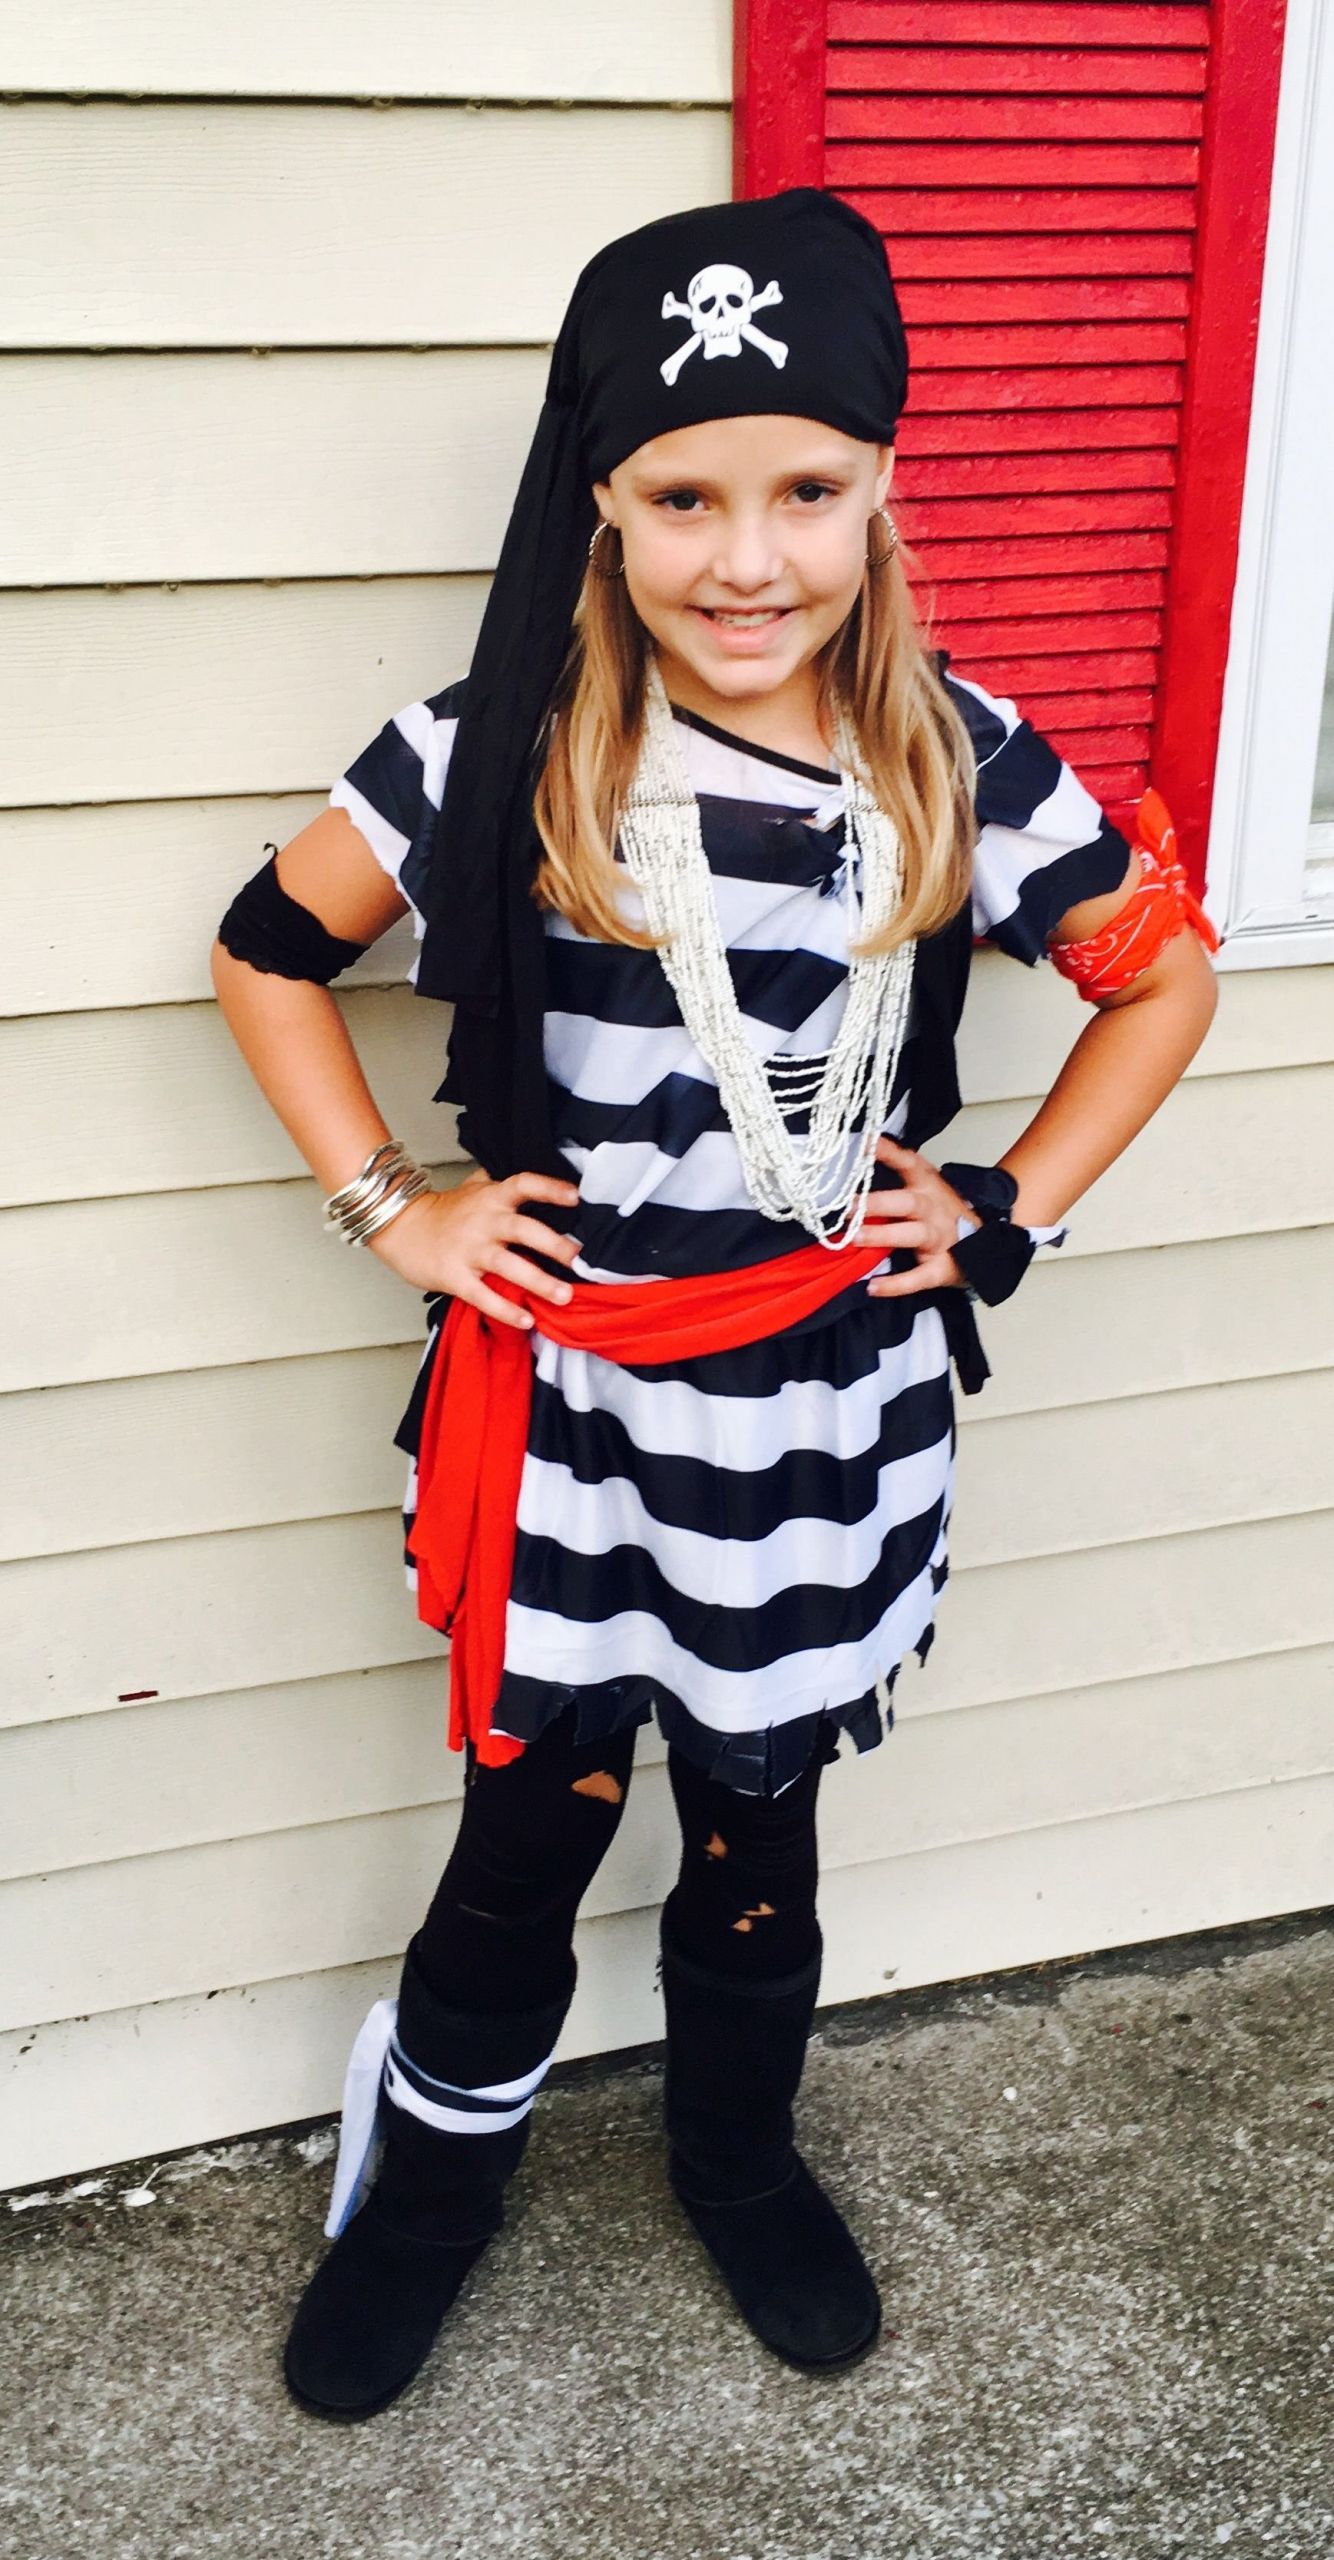 Easy DIY Costume For Kids
 10 Attractive Homemade Pirate Costume Ideas For Kids 2019